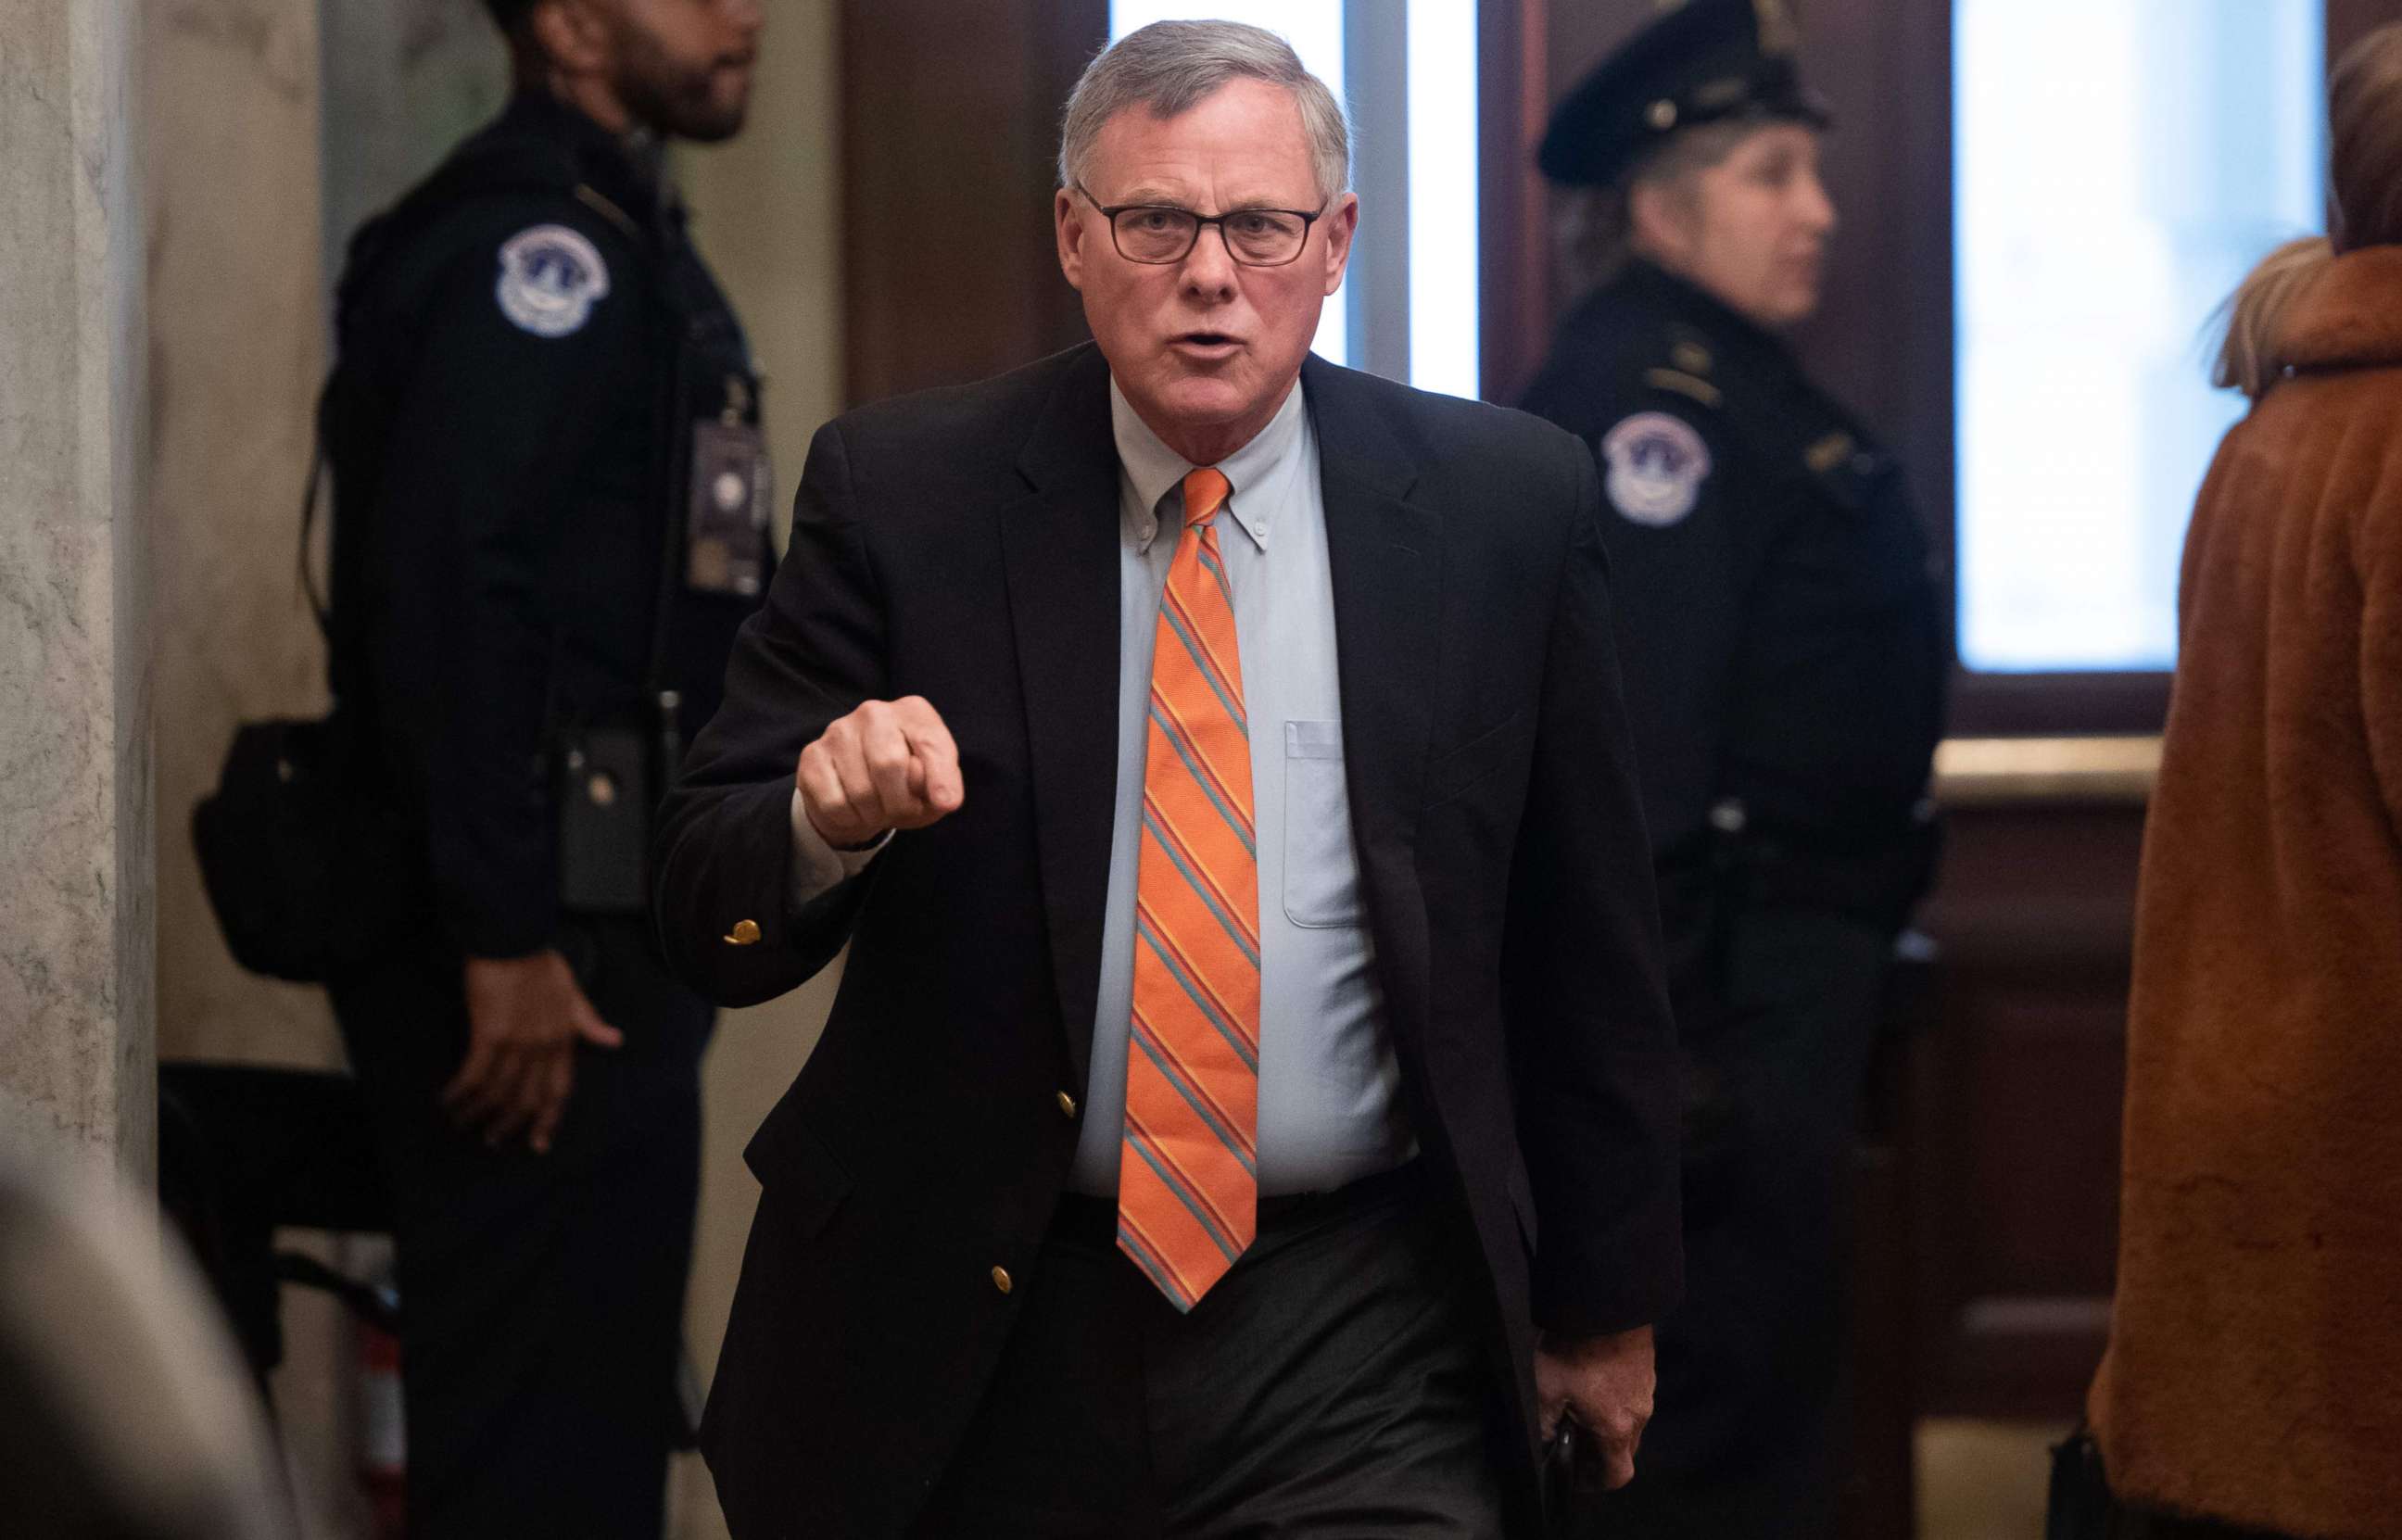 PHOTO: In this file photo taken on Jan. 21, 2020, Sen. Richard Burr, R-N.C., arrives for the Senate impeachment trial of President Donald Trump at the Capitol in Washington, D.C. 